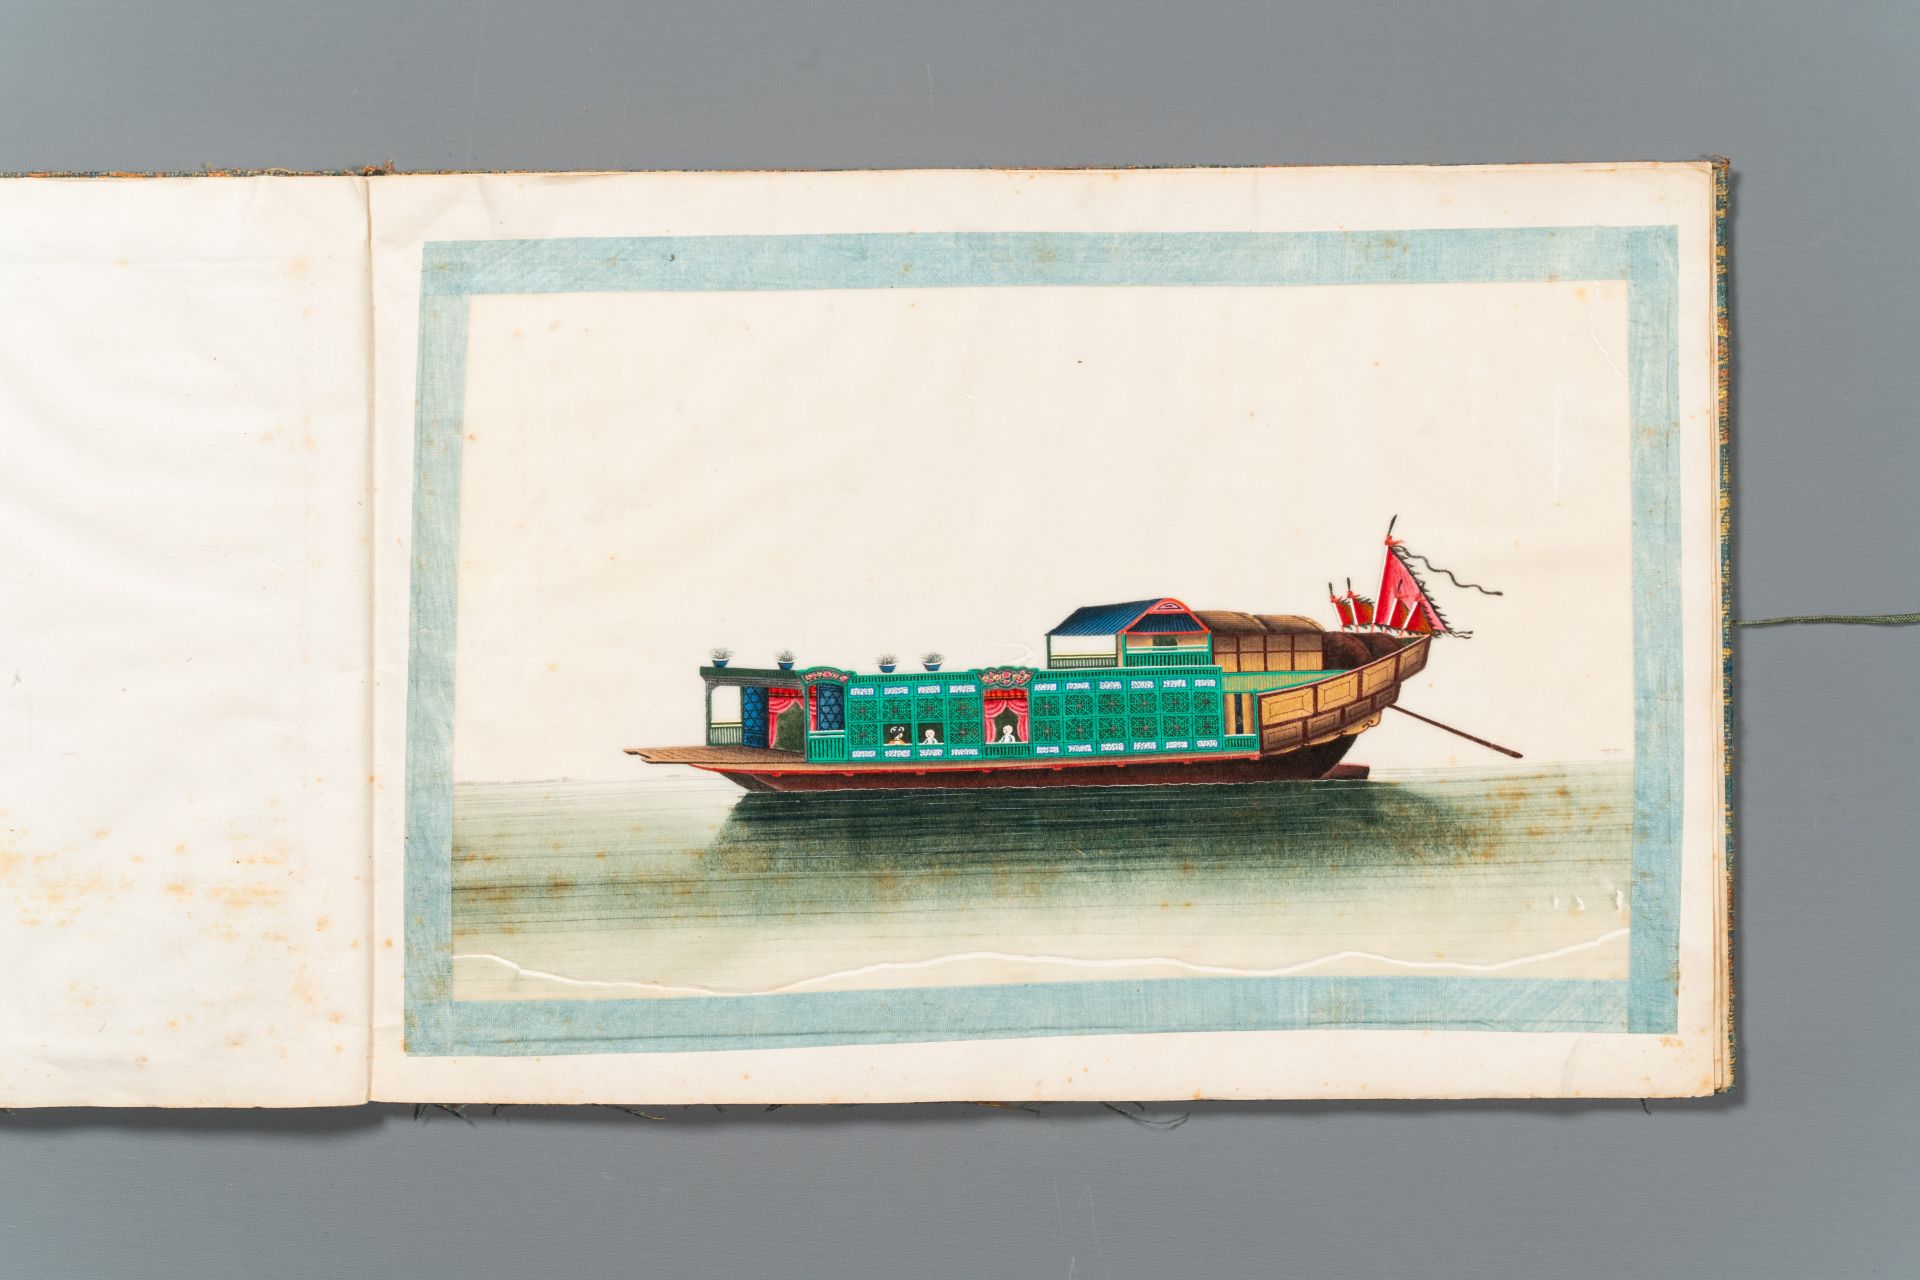 A rare album with Chinese rice paper paintings of 'Hong' views, figures and ships, Canton, Foekhing - Image 12 of 14